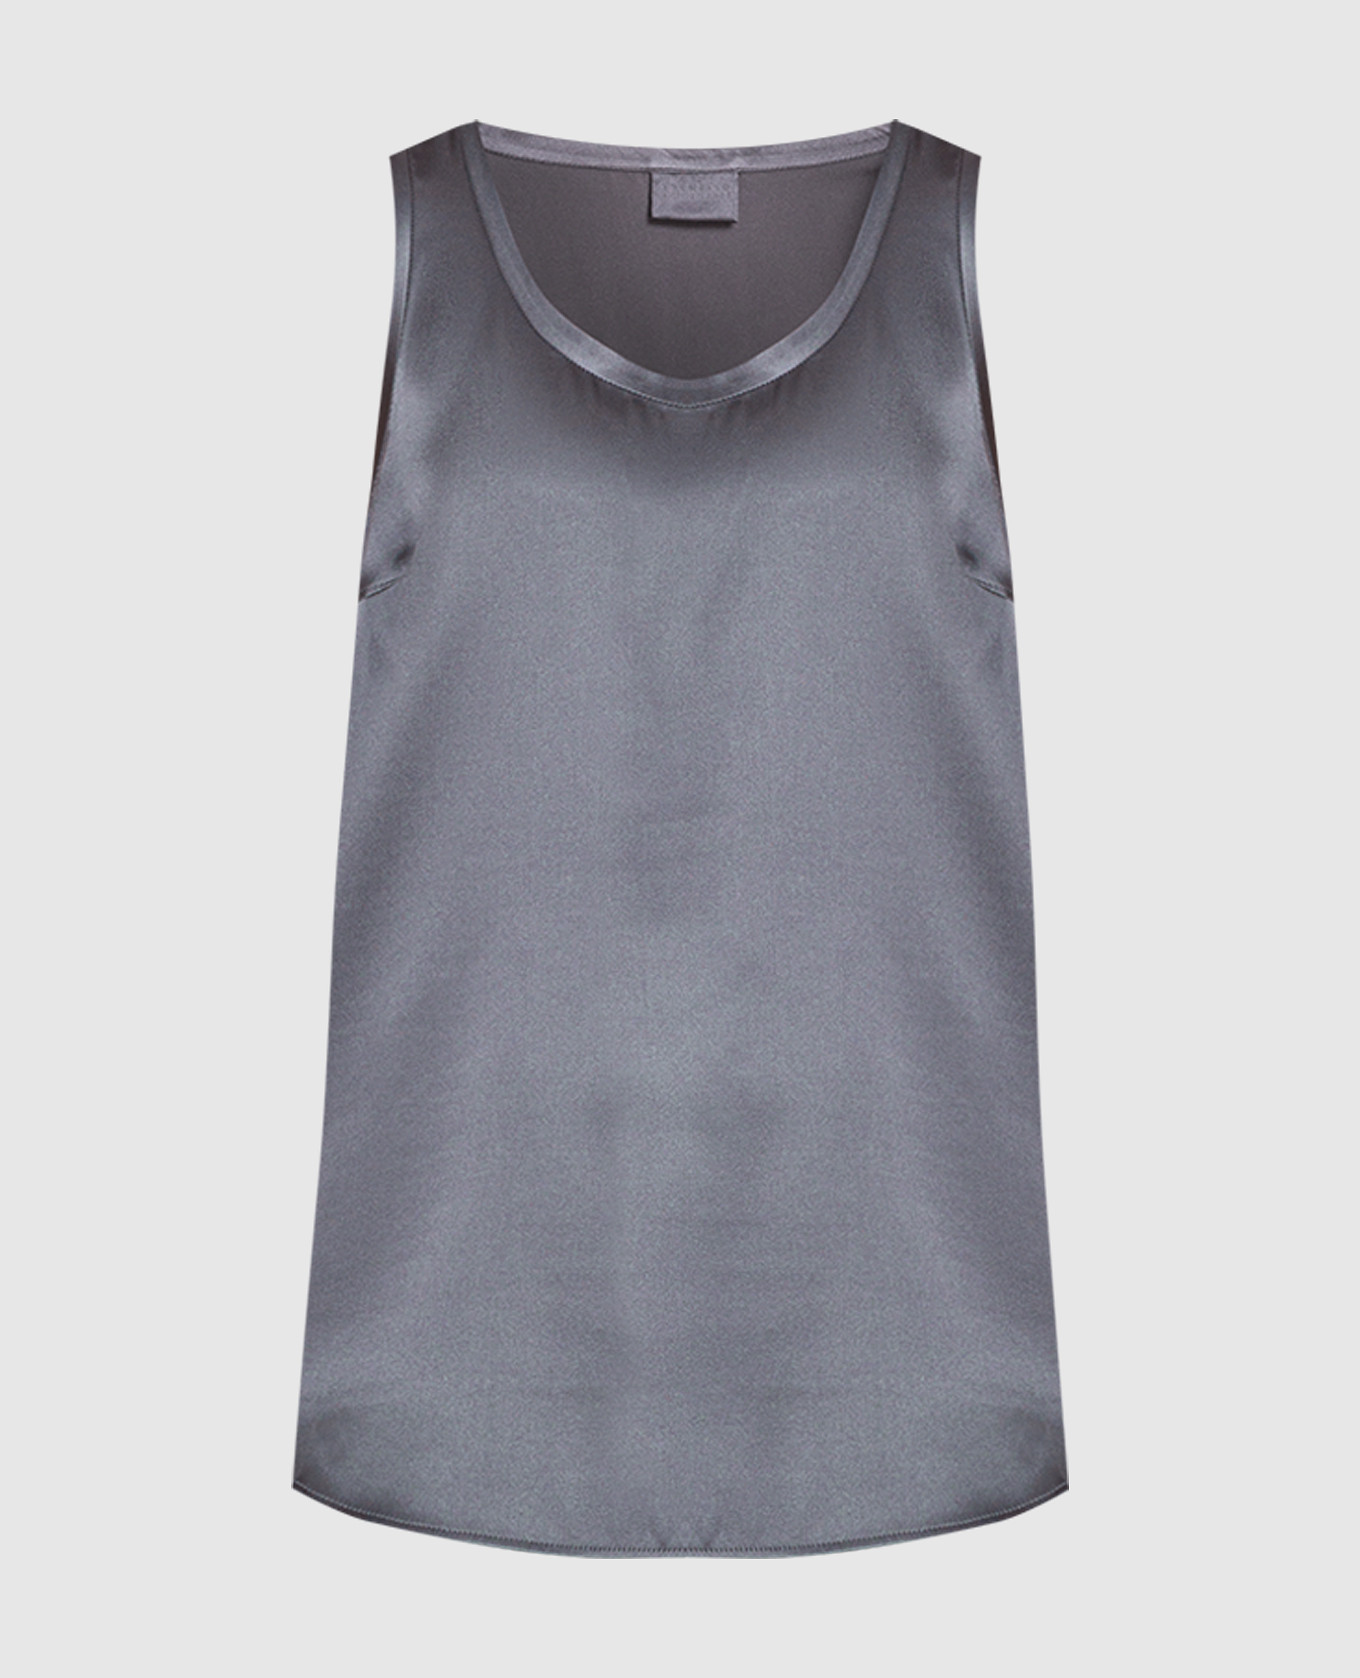 Charcoal silk top with scalloped hem